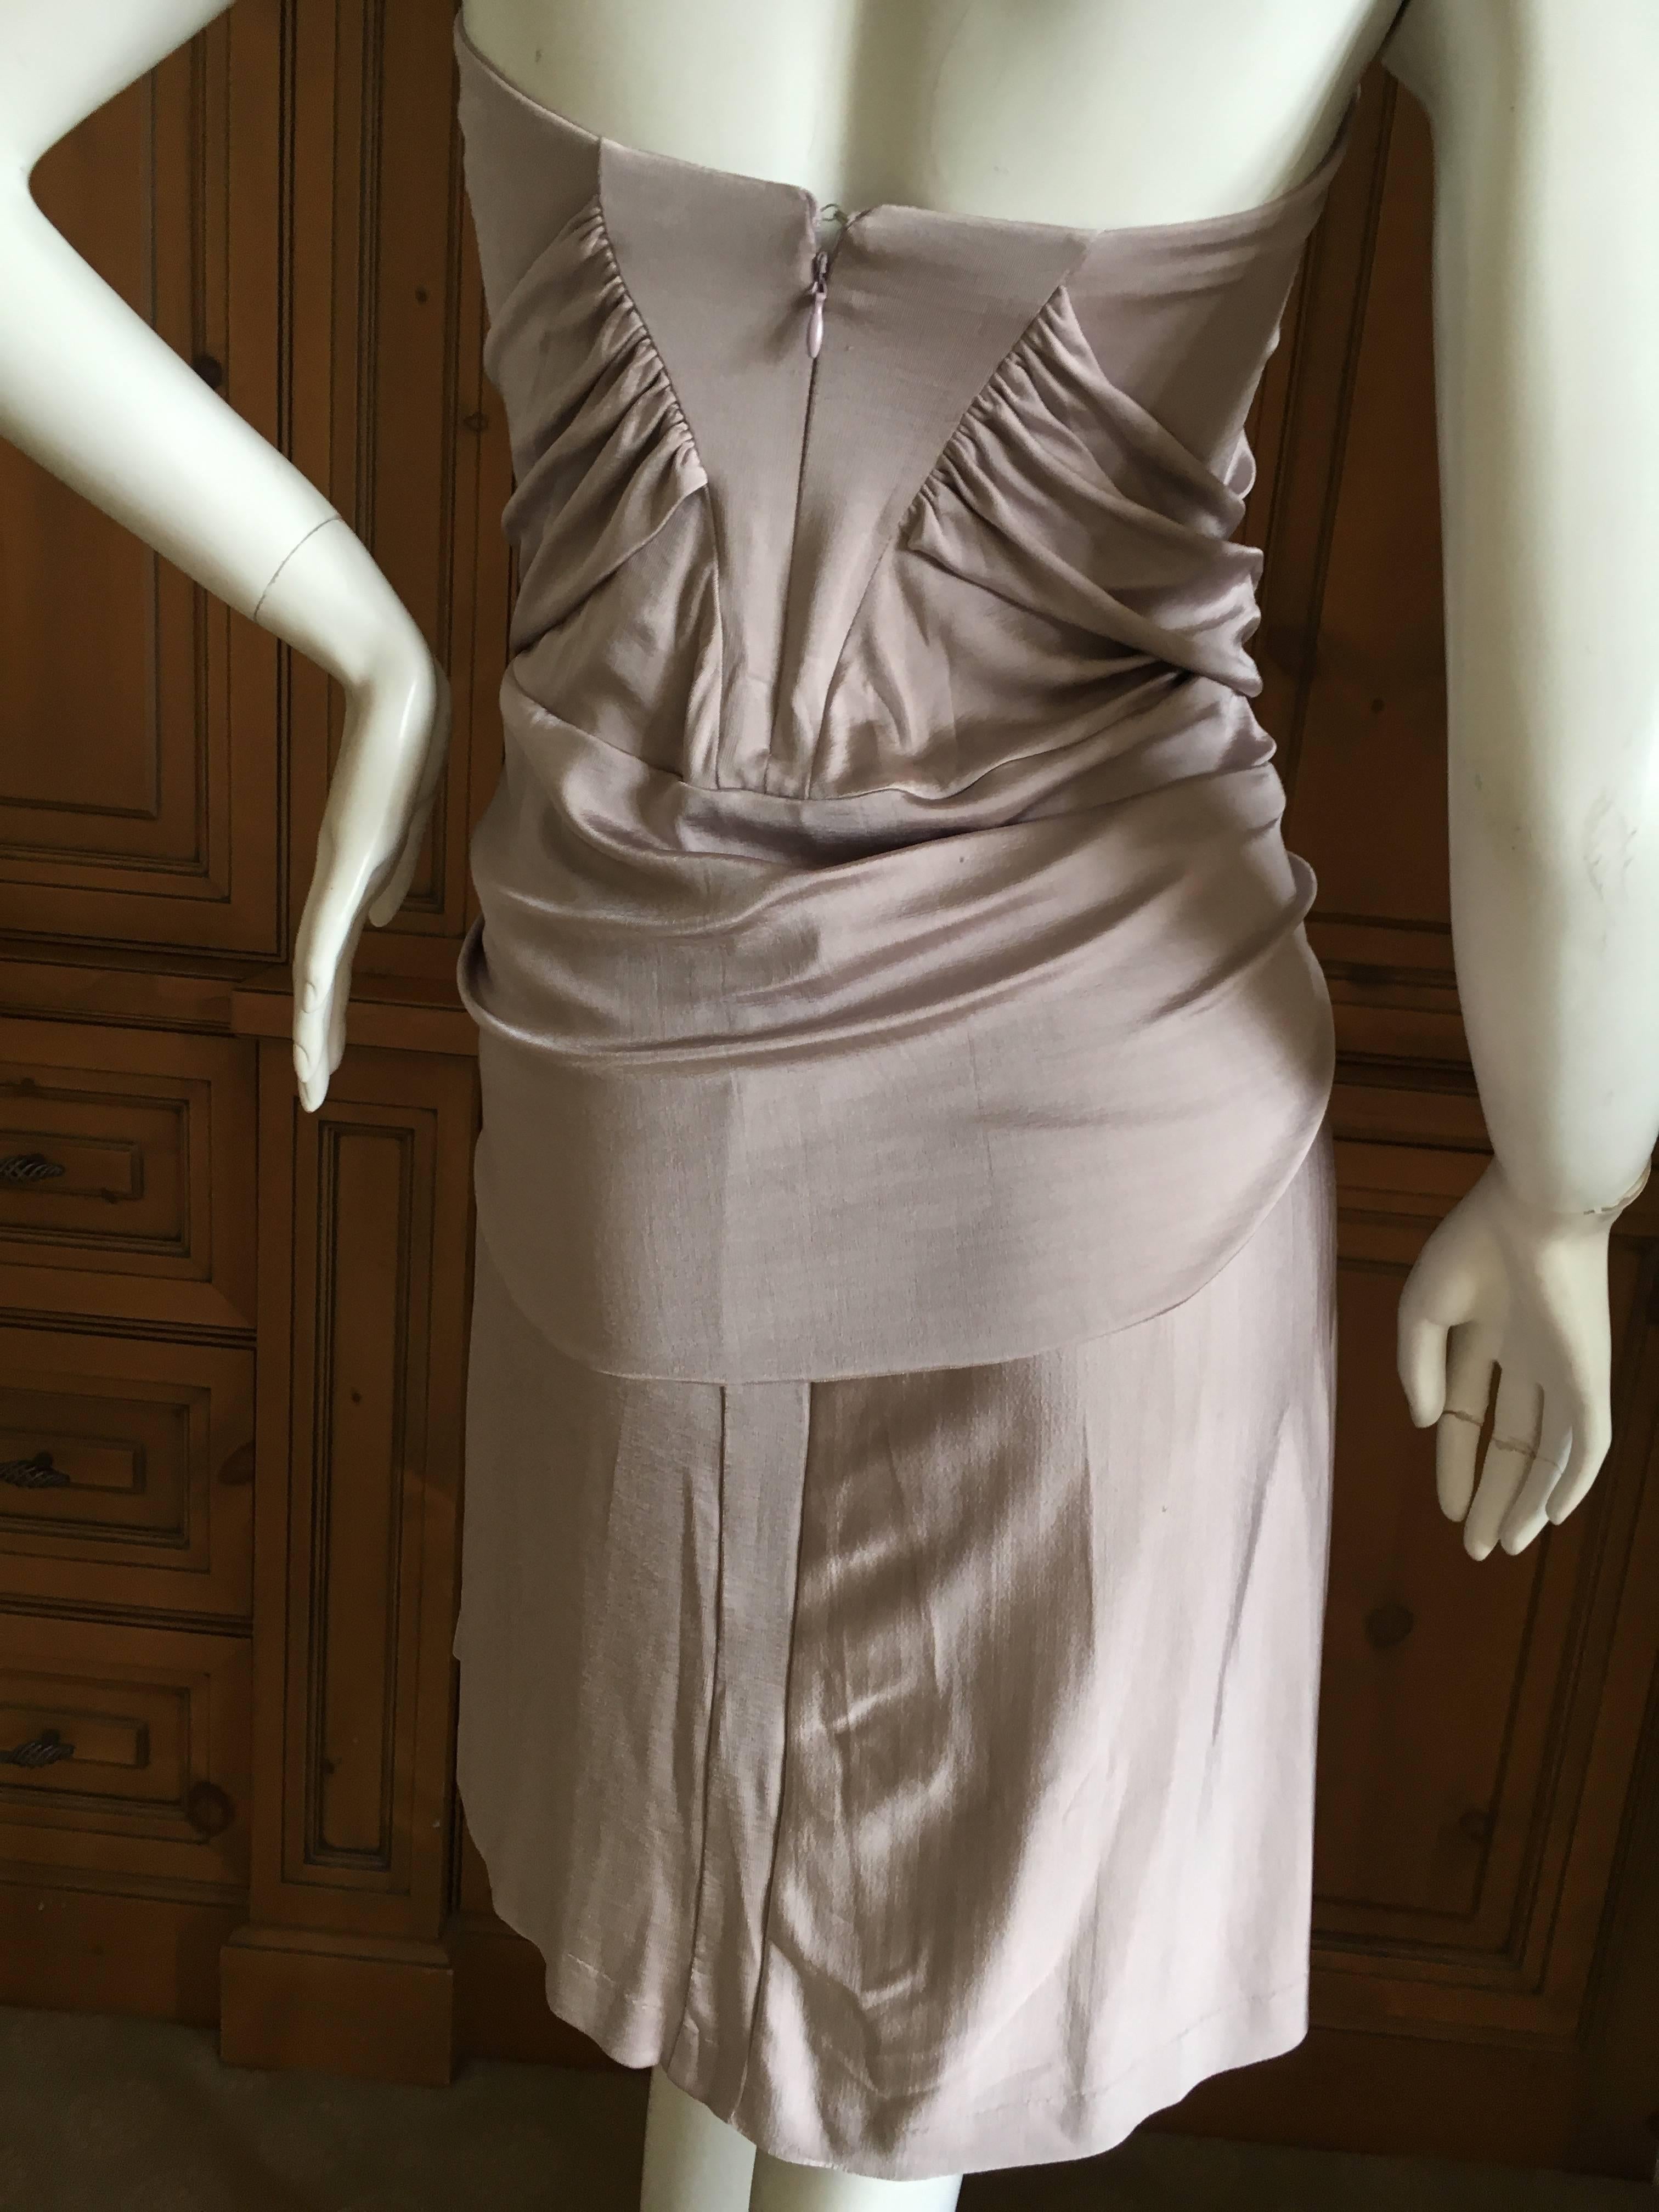 Wonderful gray ruched dress from Tom Ford for YSL, 2002.
Size L
Bust 34"
Waist 32"
Hips 38"
Length 31"
Excellent condition